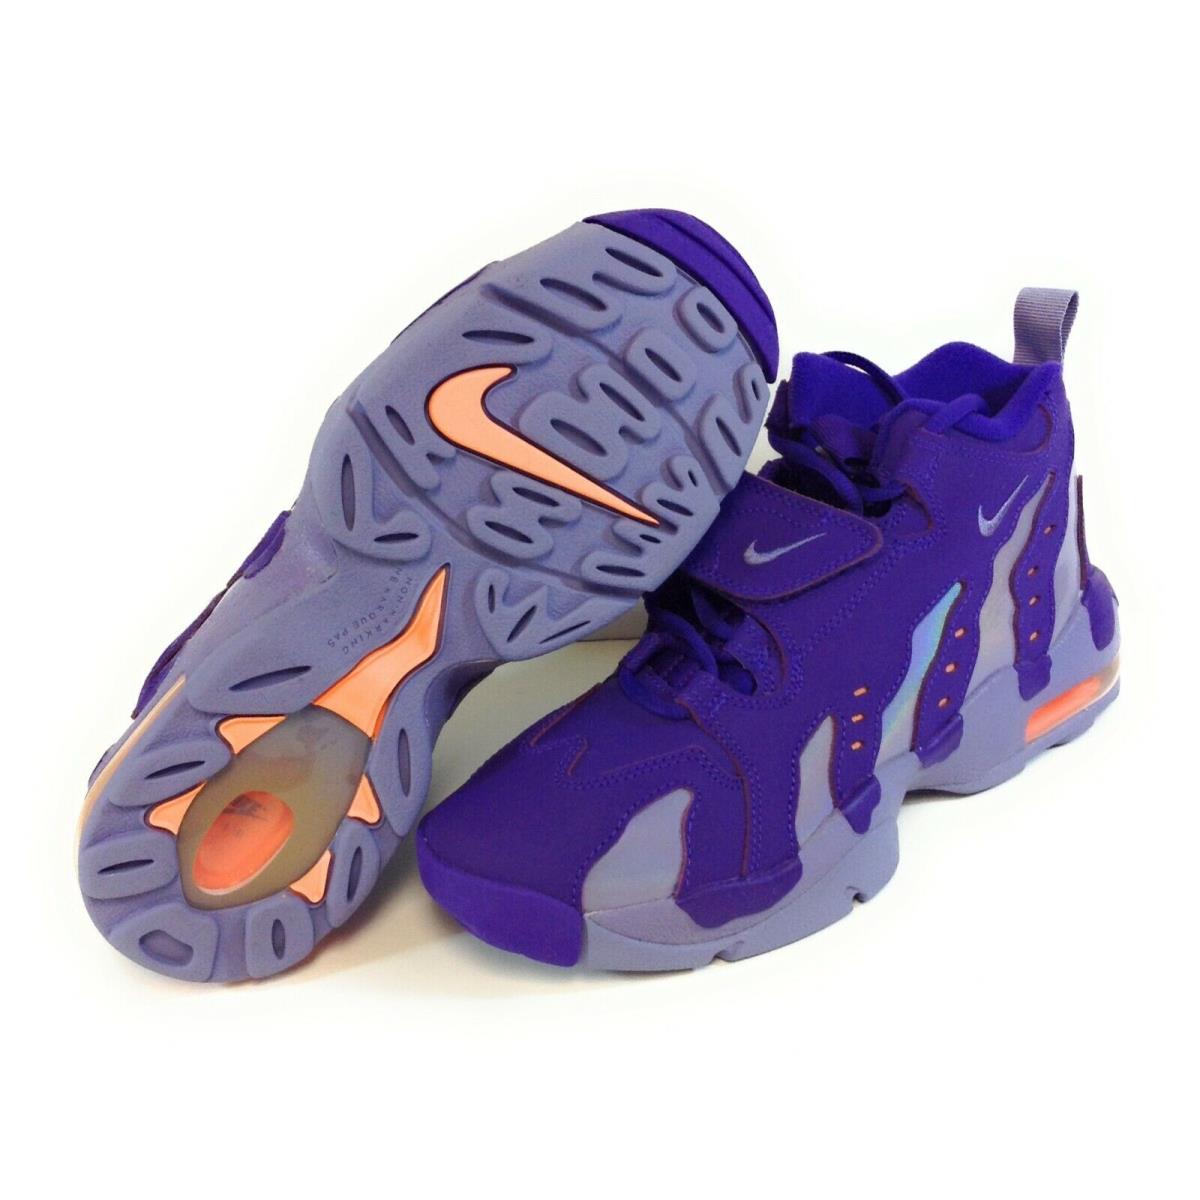 Boys Youth Nike Air DT Max `96 616502 500 Purple 2013 Deadstock Sneakers Shoes